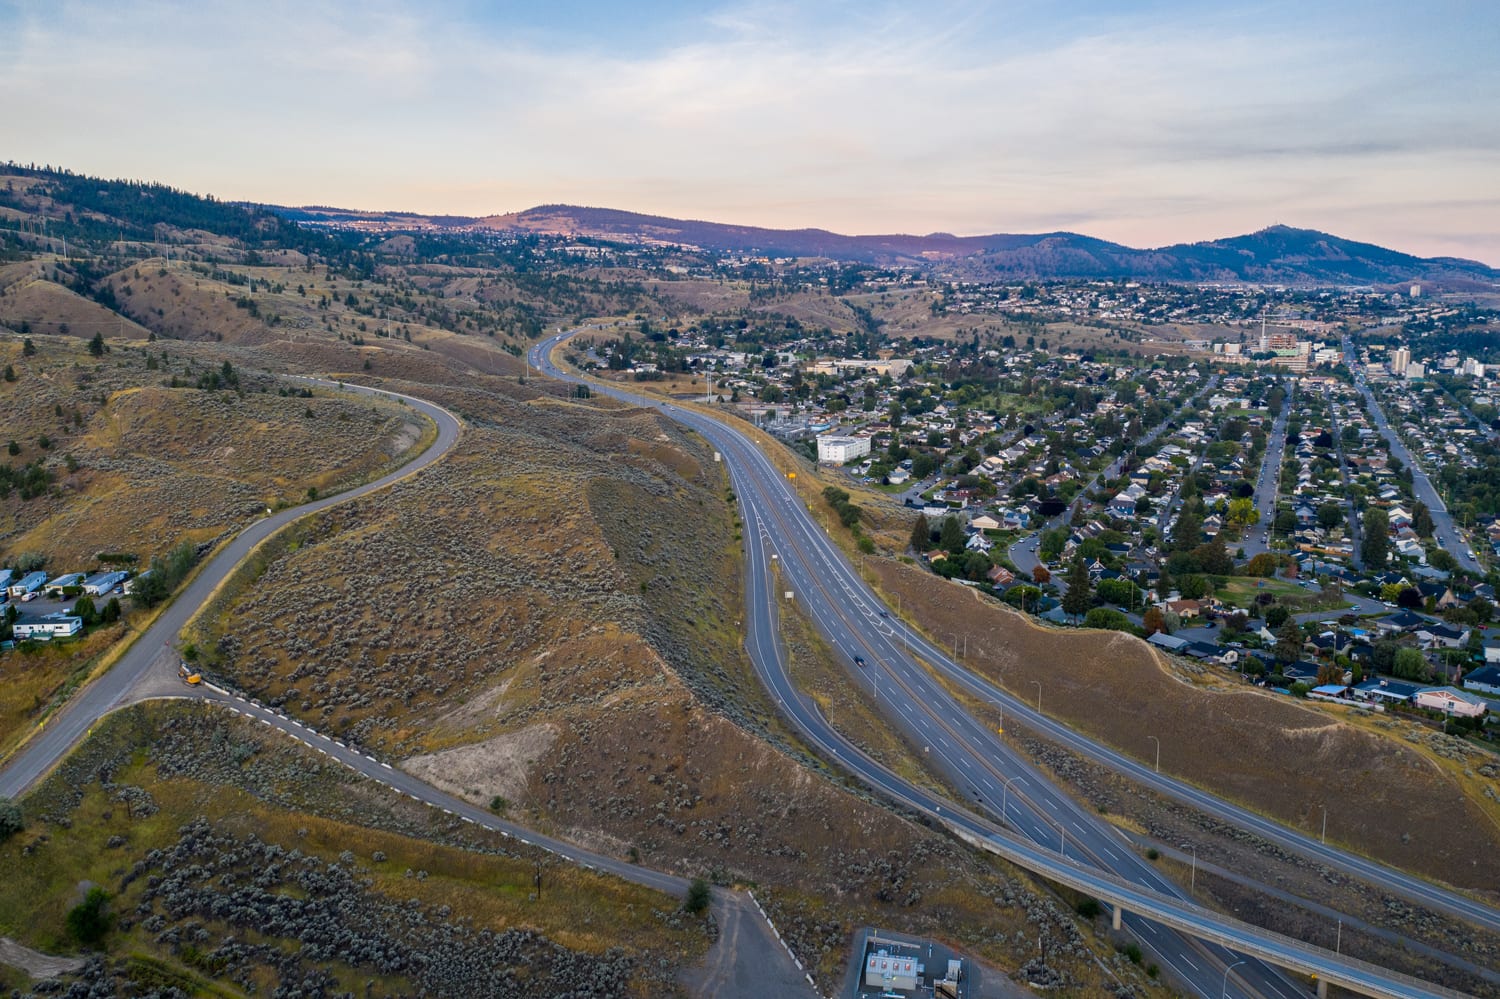 City of Kamloops Aerial View Photography